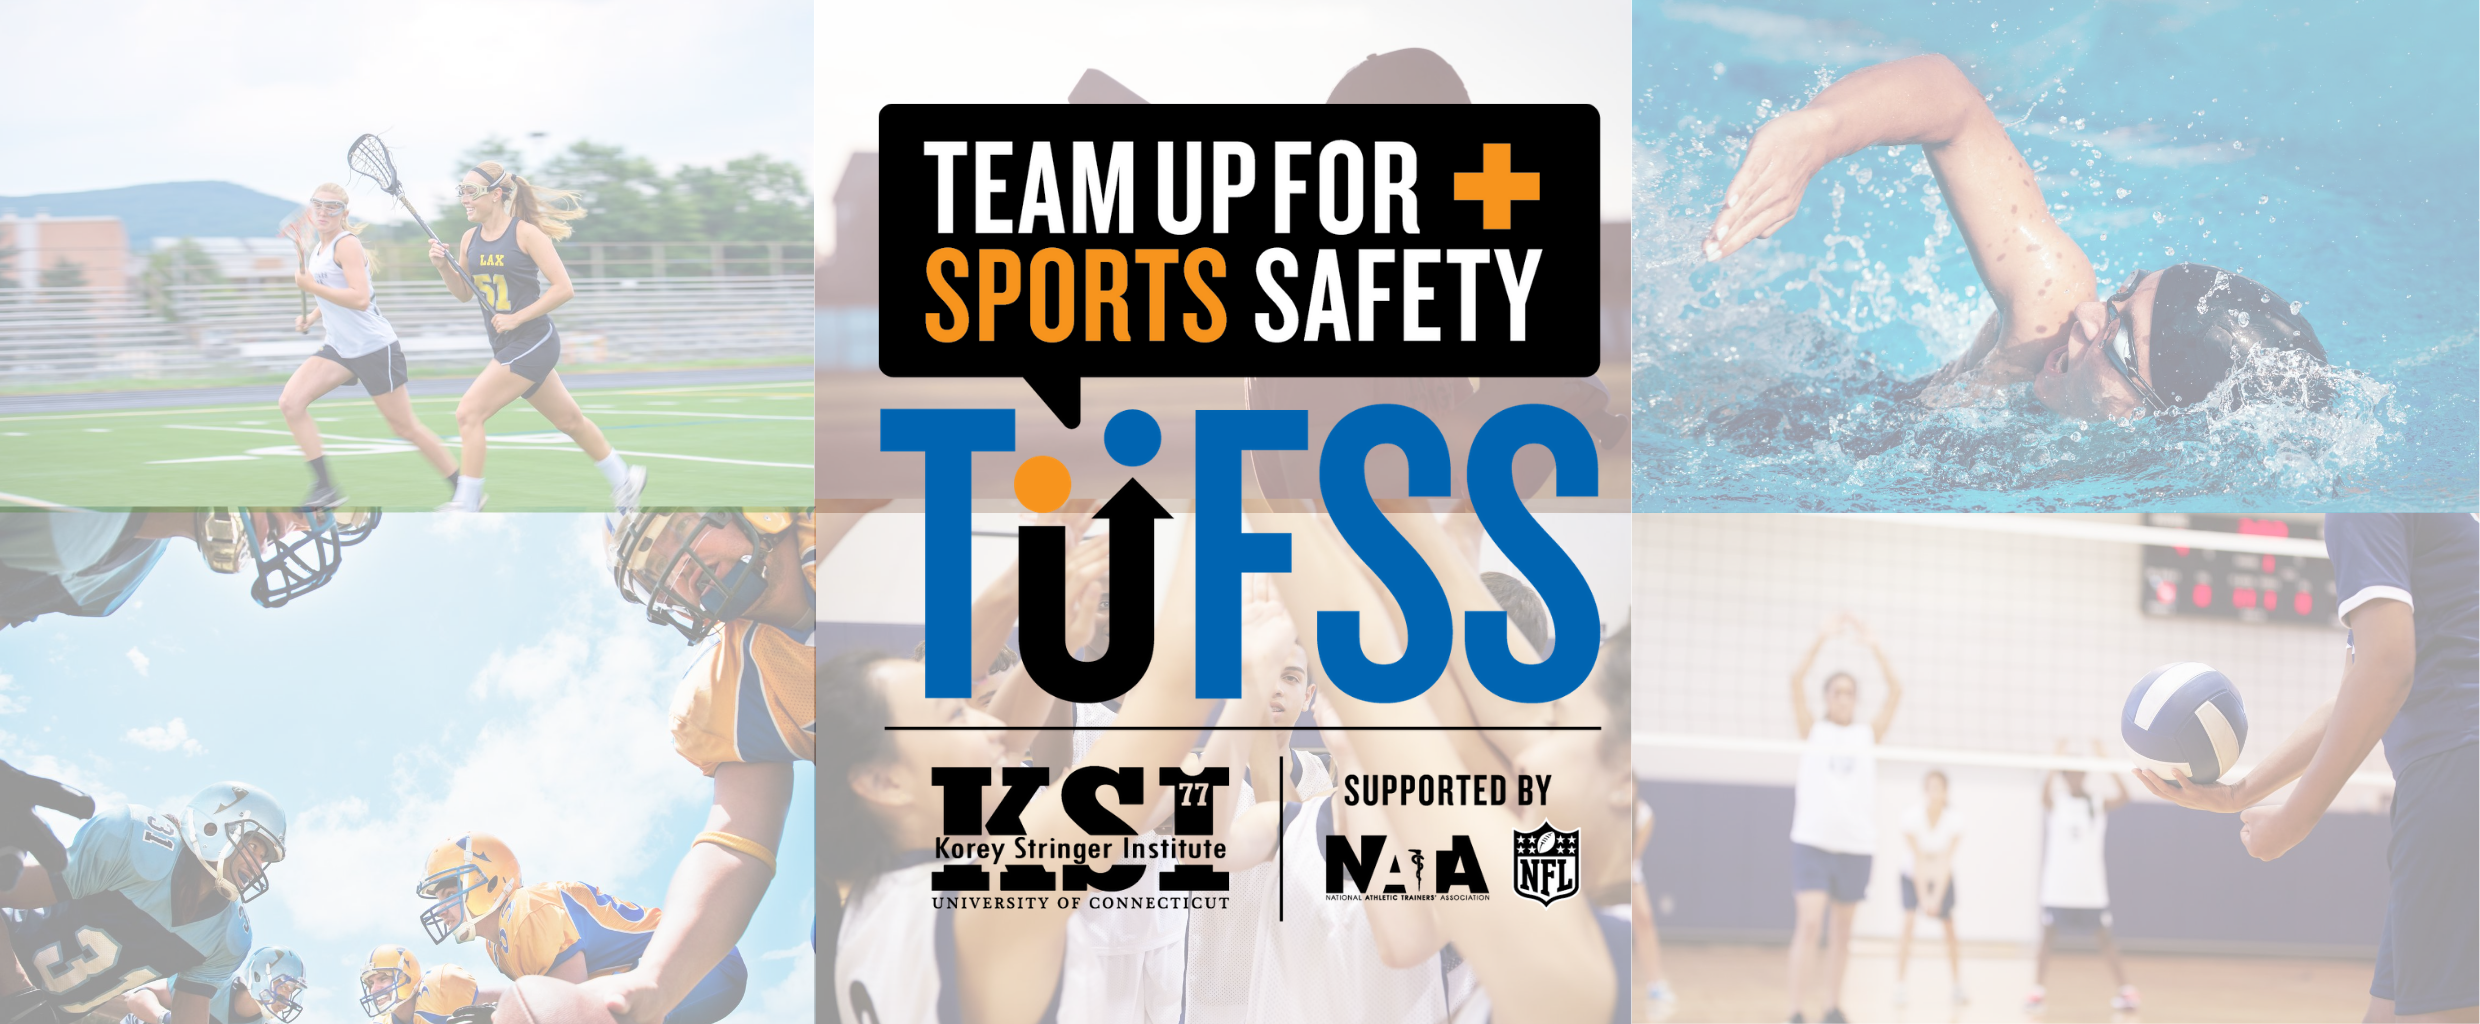 Team Up for Sports Safety